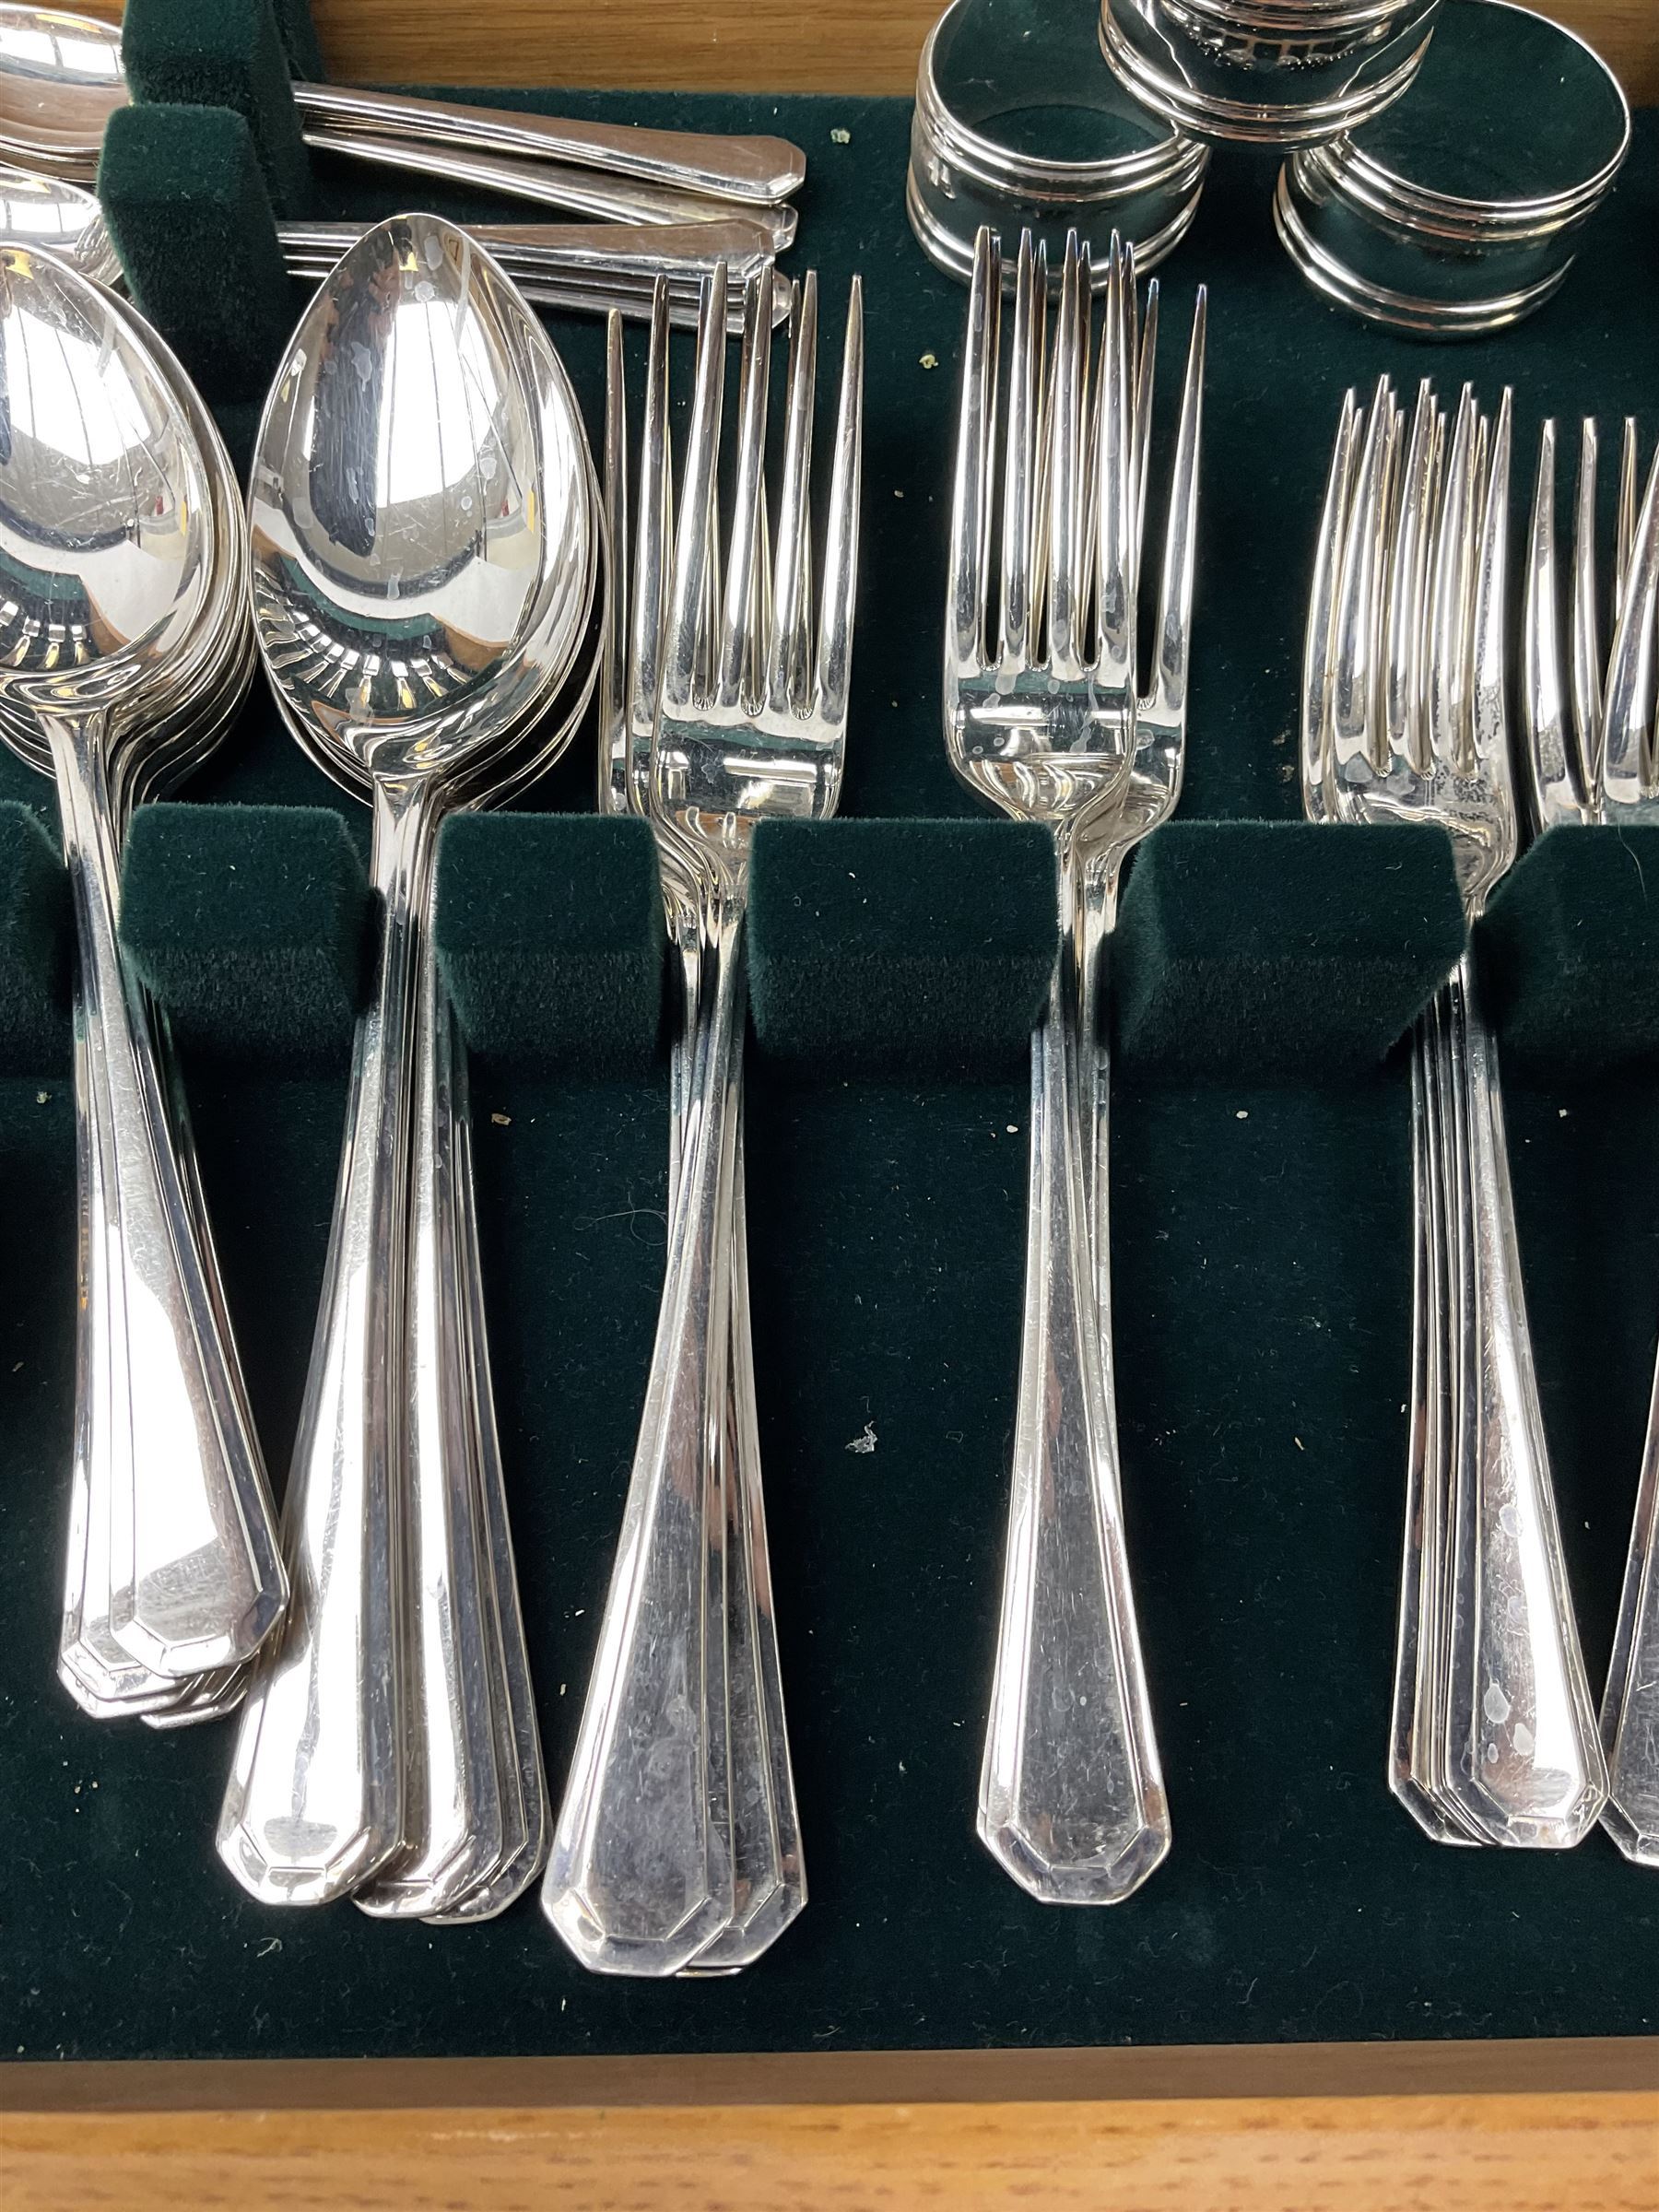 K. Bright Ltd cased canteen of silver plated cutlery - Image 2 of 4